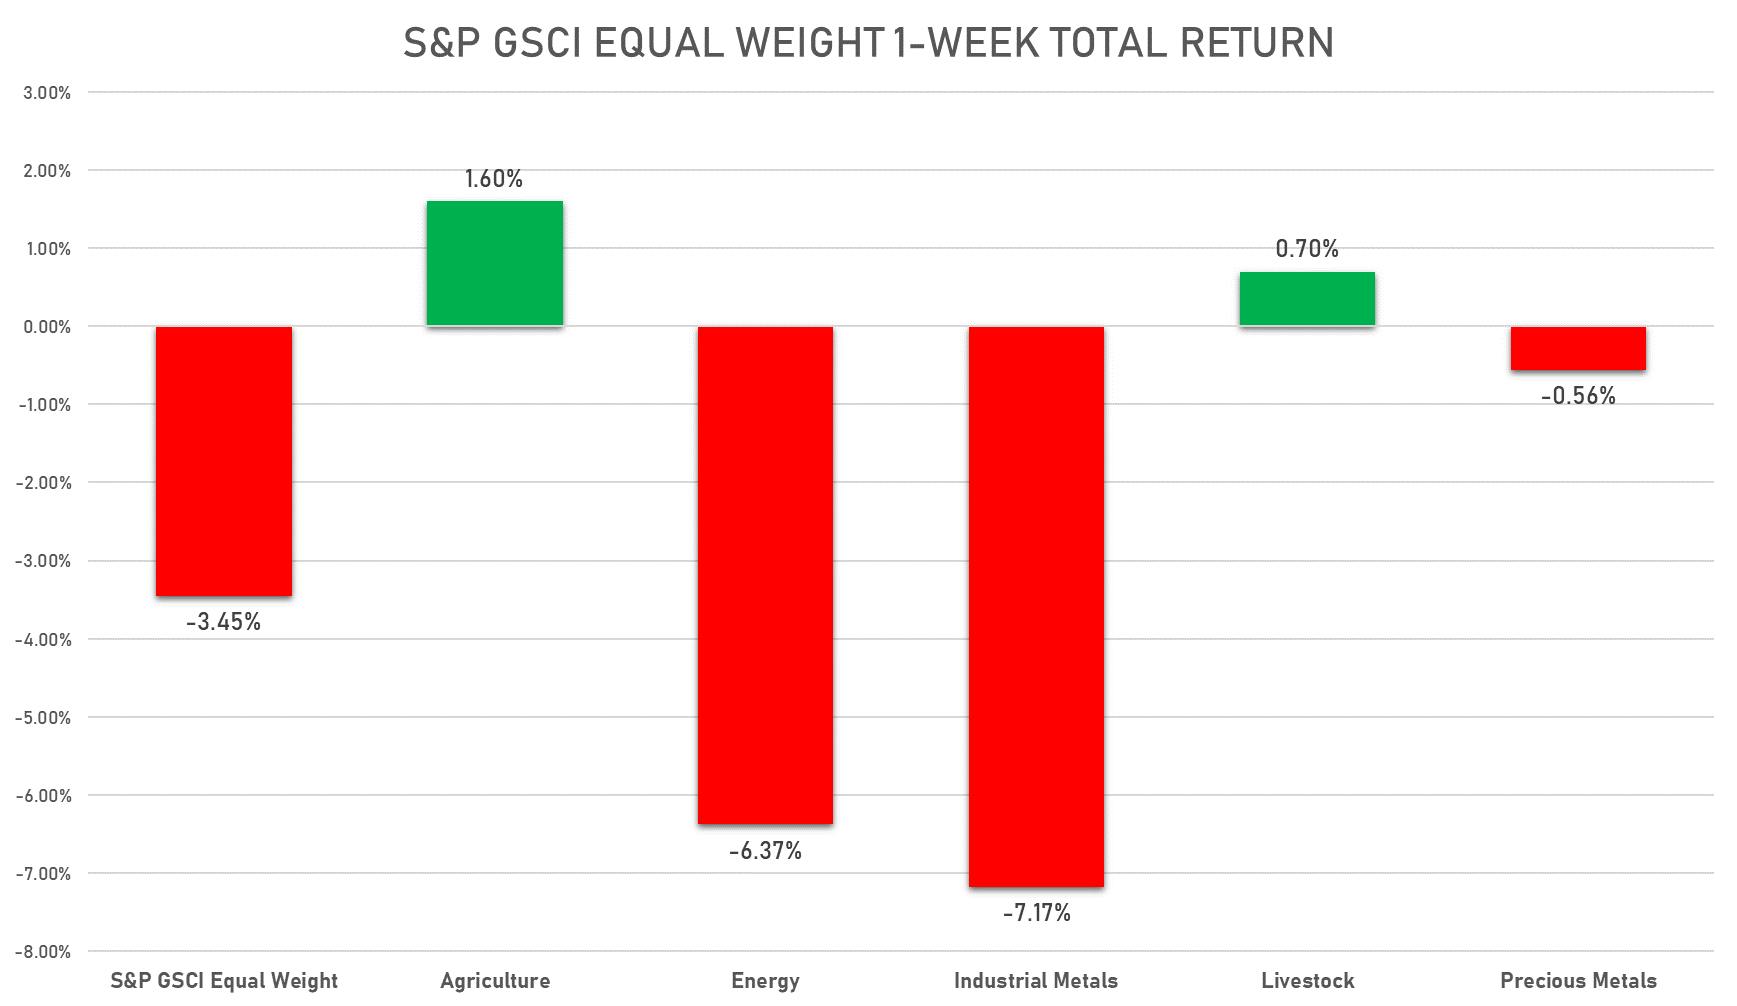 S&P GSCI Equal Weight Total Return Index | Sources: phipost.com, FactSet data